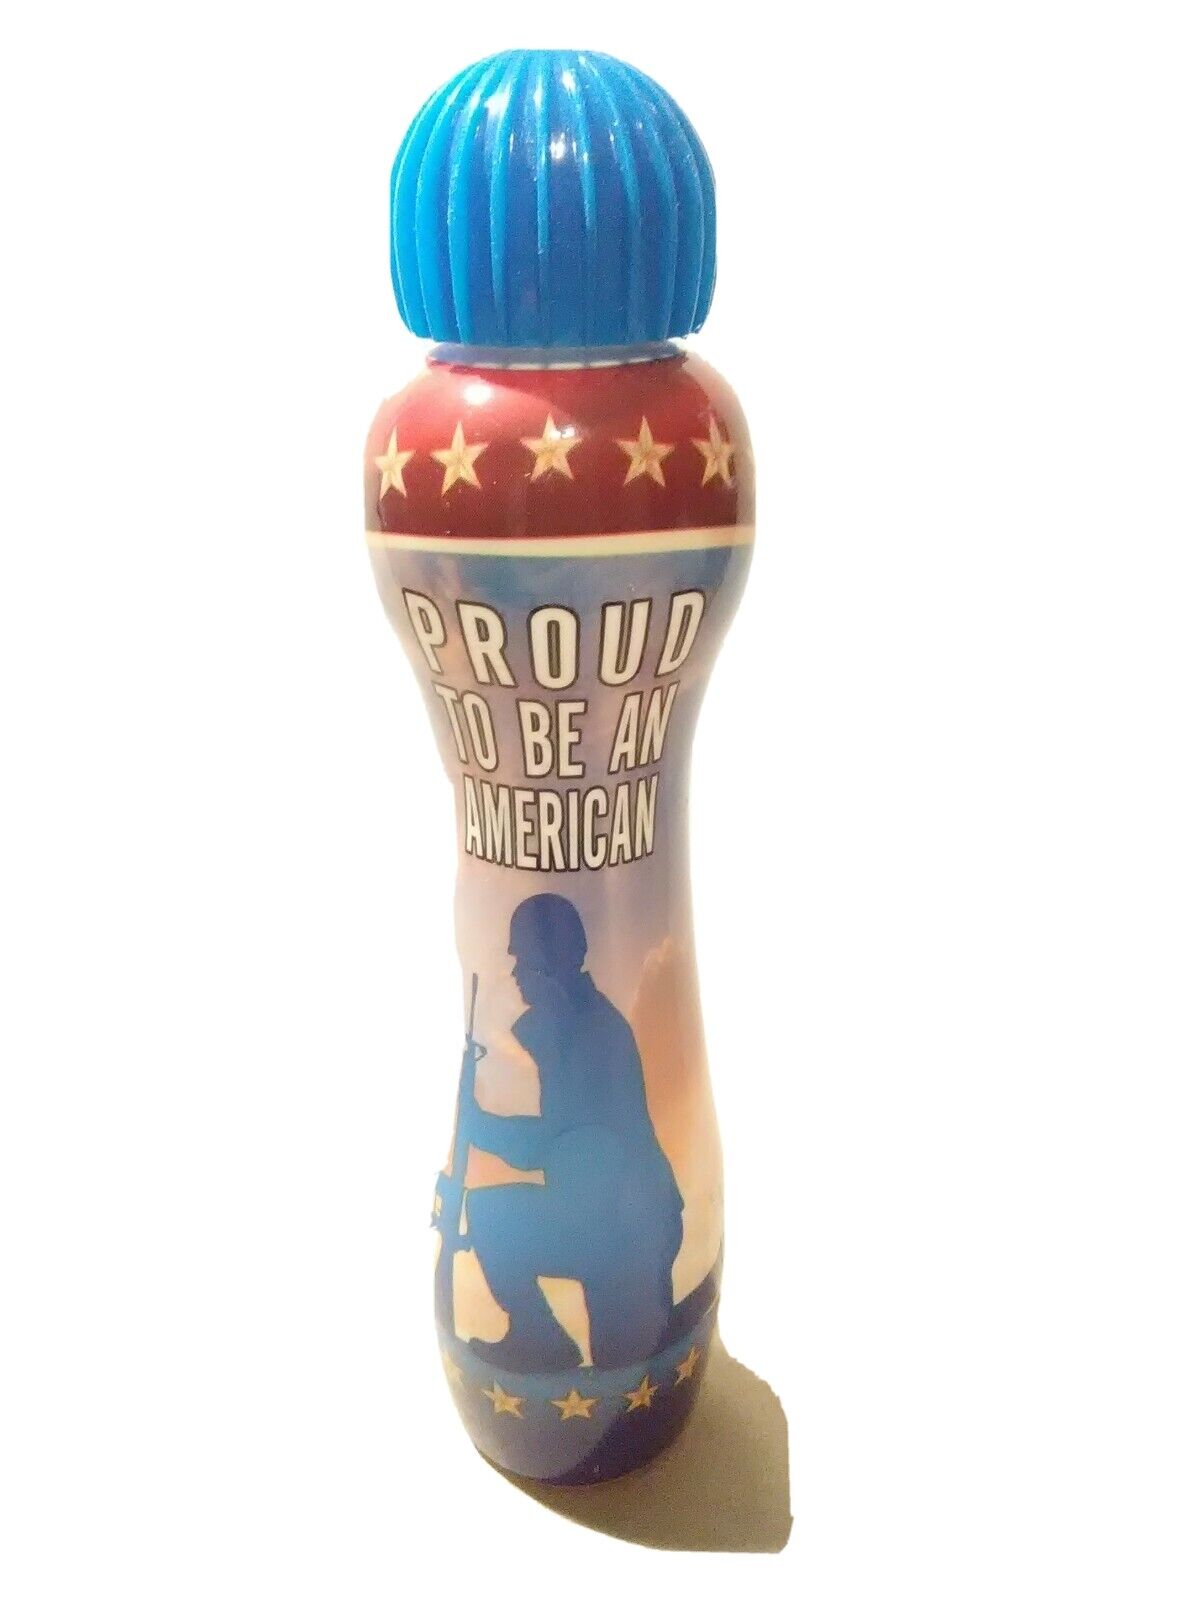 LAS VEGAS, NEVADA PROUD TO BE AN AMERICAN LOGO DAUBER GREAT FOR ANY COLLECTION